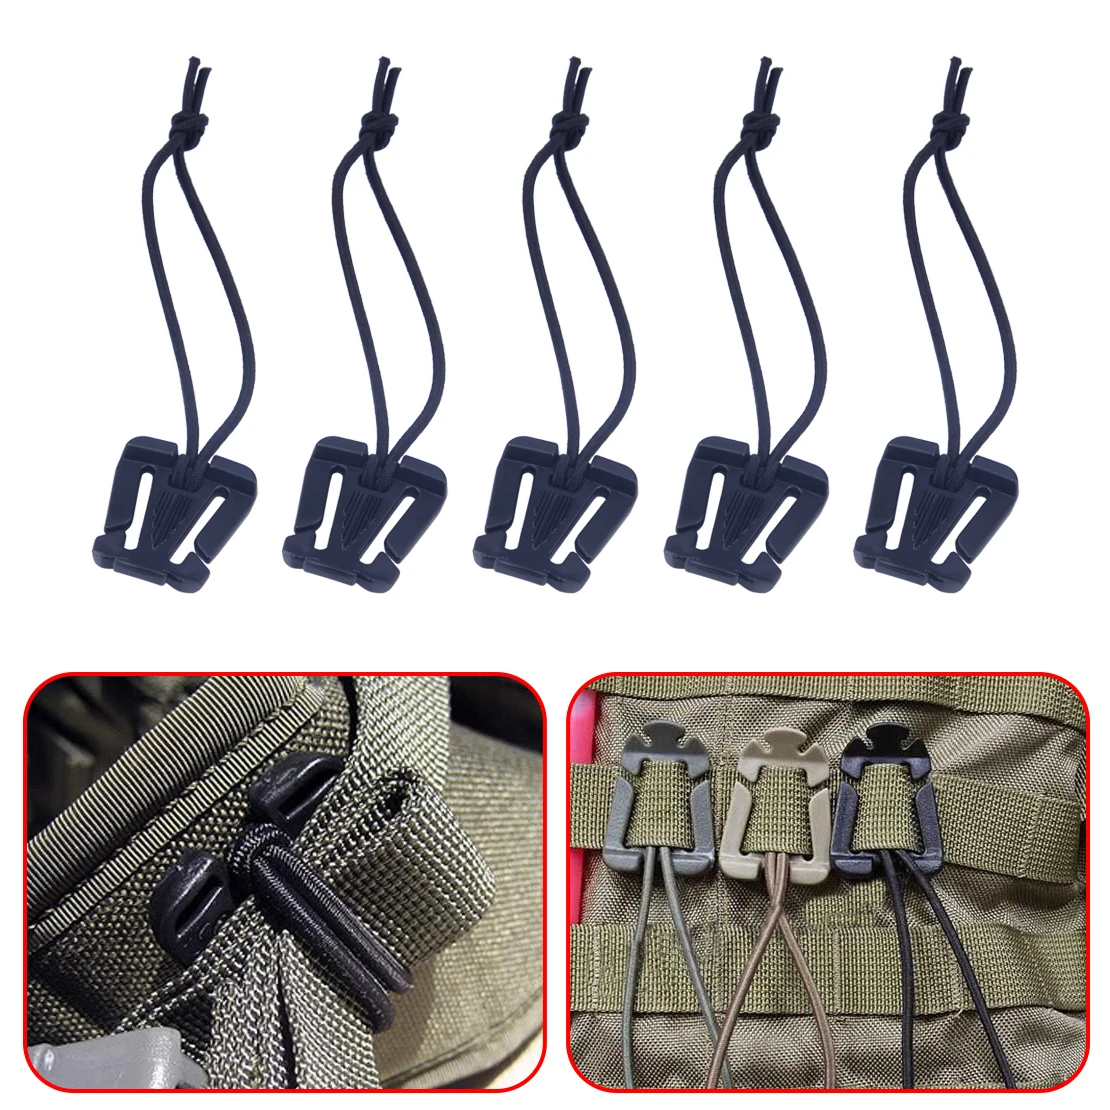 Details about   10Pcs Tactical Elastic Cord Buckle Clip MOLLE Webbing Tie-Down Carabiner Outdoor 